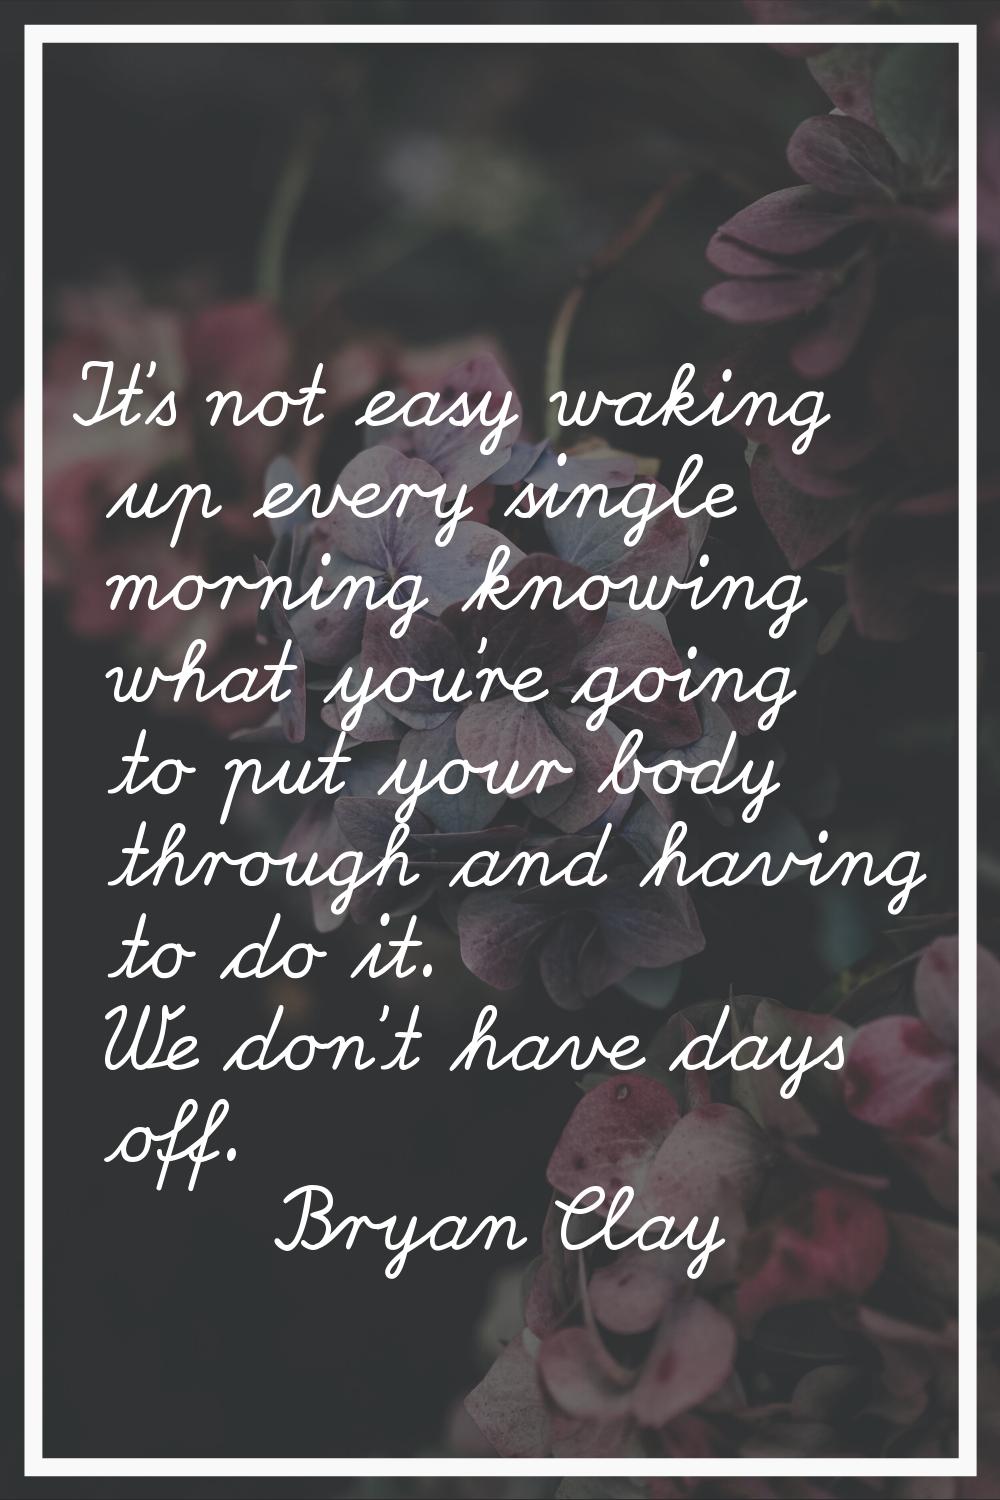 It's not easy waking up every single morning knowing what you're going to put your body through and